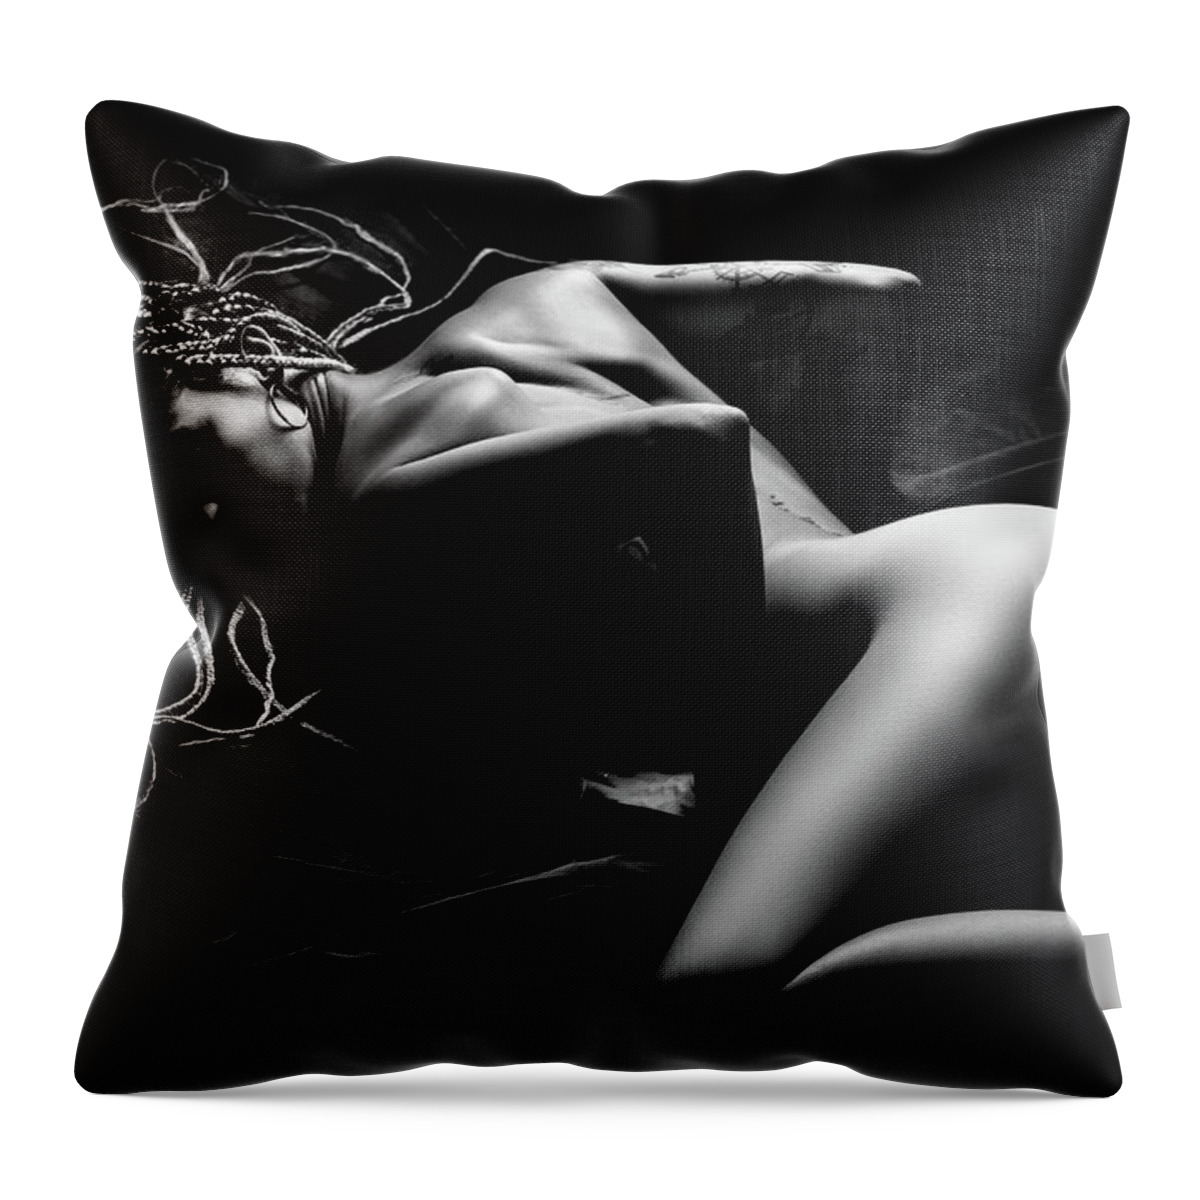 Woman Throw Pillow featuring the photograph Sensual Nude Woman 3 by Johan Swanepoel